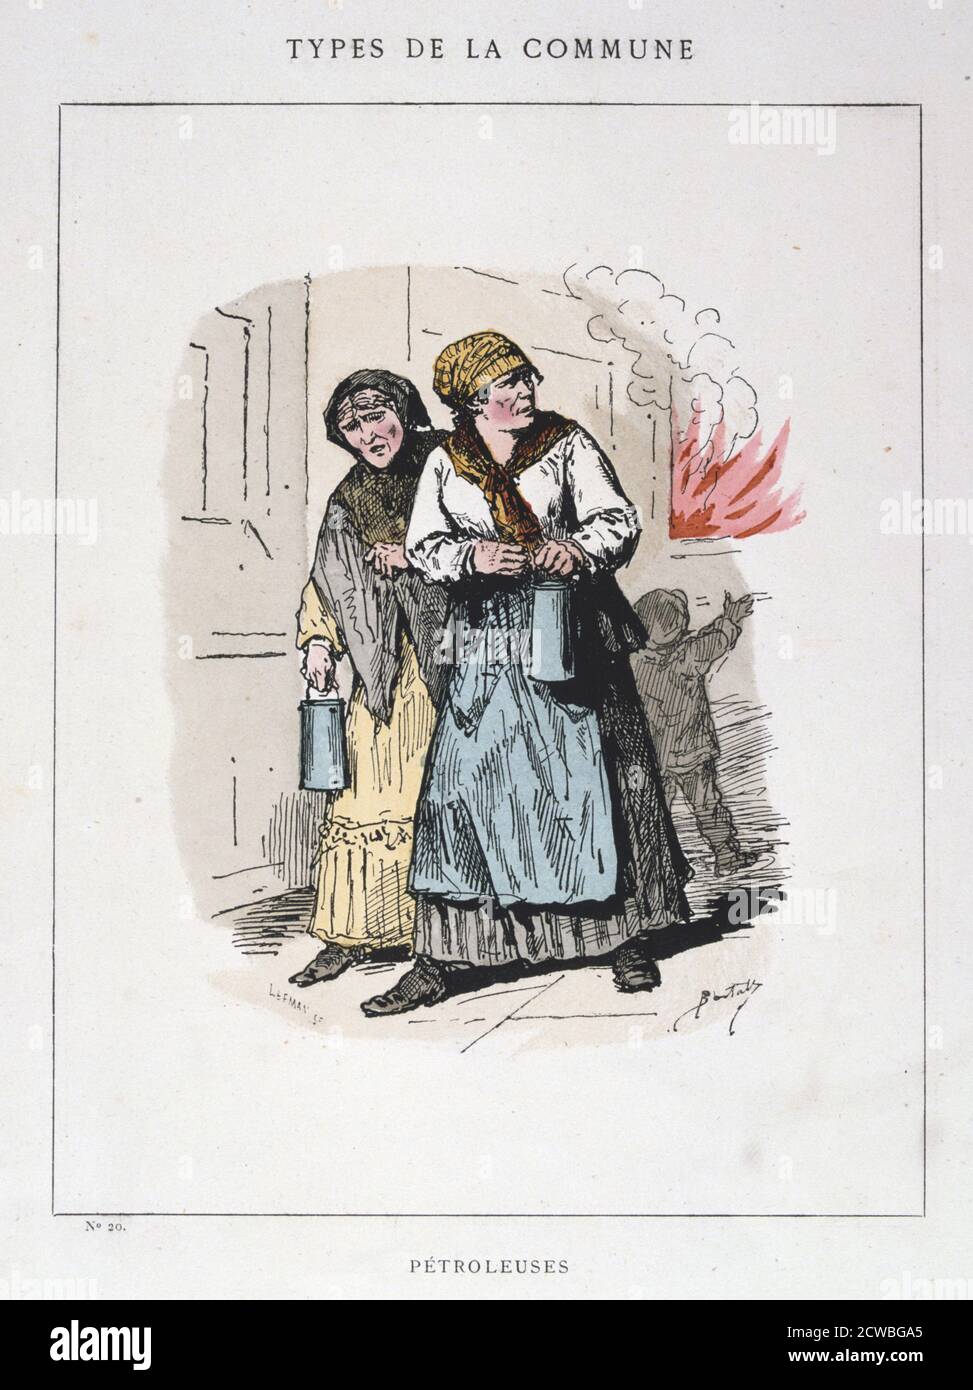 Petroleuses', Paris Commune, 1871. Cartoon from a series titled Types de la Commune. Petroleuses were women extremists who used petroleum to set fire to buildings during the Paris Commune. The Commune was established when the citizens of Paris, many of them armed National Guards, rebelled against the policies of the conservative government formed after the end of the Franco-Prussian War. The left-wing regime of the Commune held sway in Paris for two months until government troops retook the city in bloody fighting in May 1871. The events of the Commune were an inspiration to Karl Marx as well Stock Photo